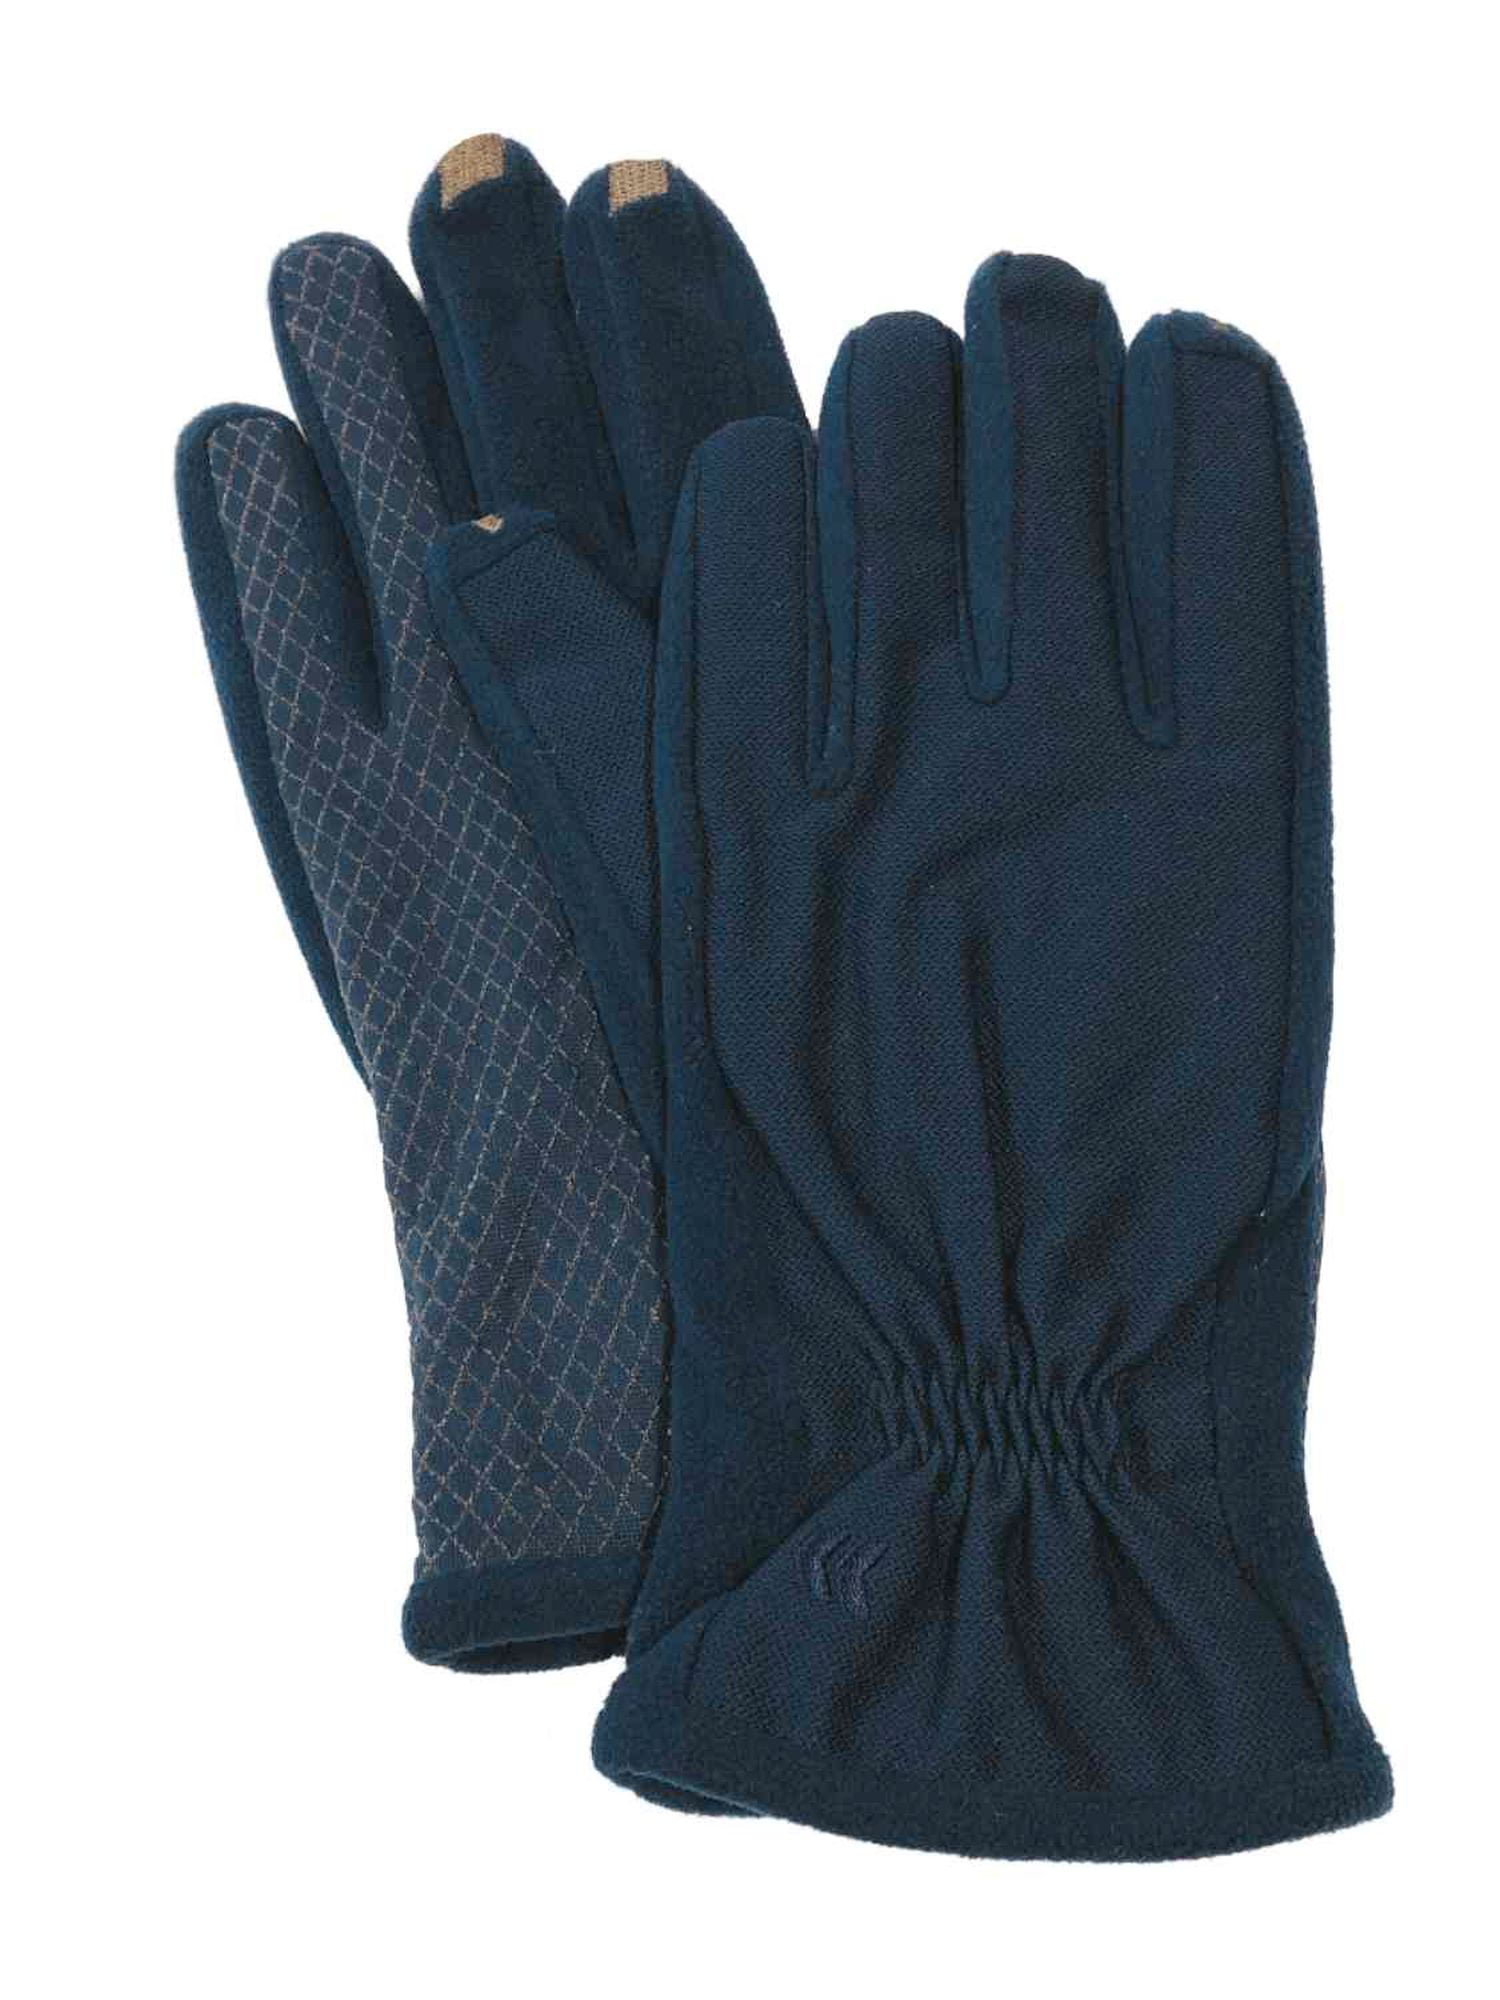 Isotoner Ladies Smartouch Thermal Gloves with Buttons 